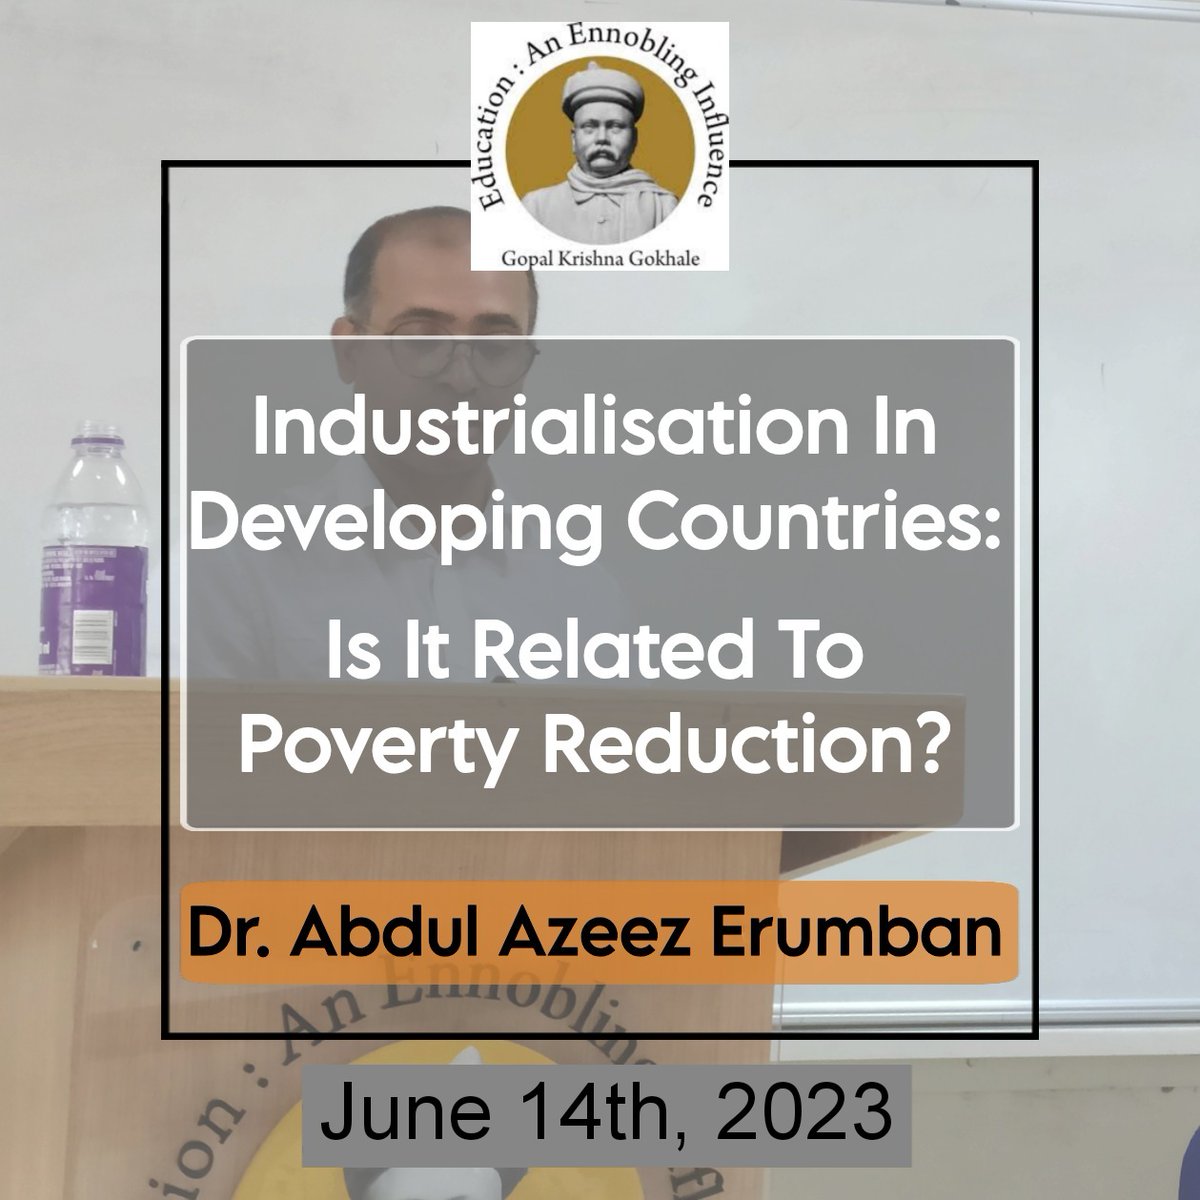 Dr. Abdul Azeez Erumban, a distinguished faculty member from the University of Groningen, Netherlands, shared enlightening insights on the connection between industrialization and poverty reduction in developing countries.
@univgroningen #povertyreduction
1/3